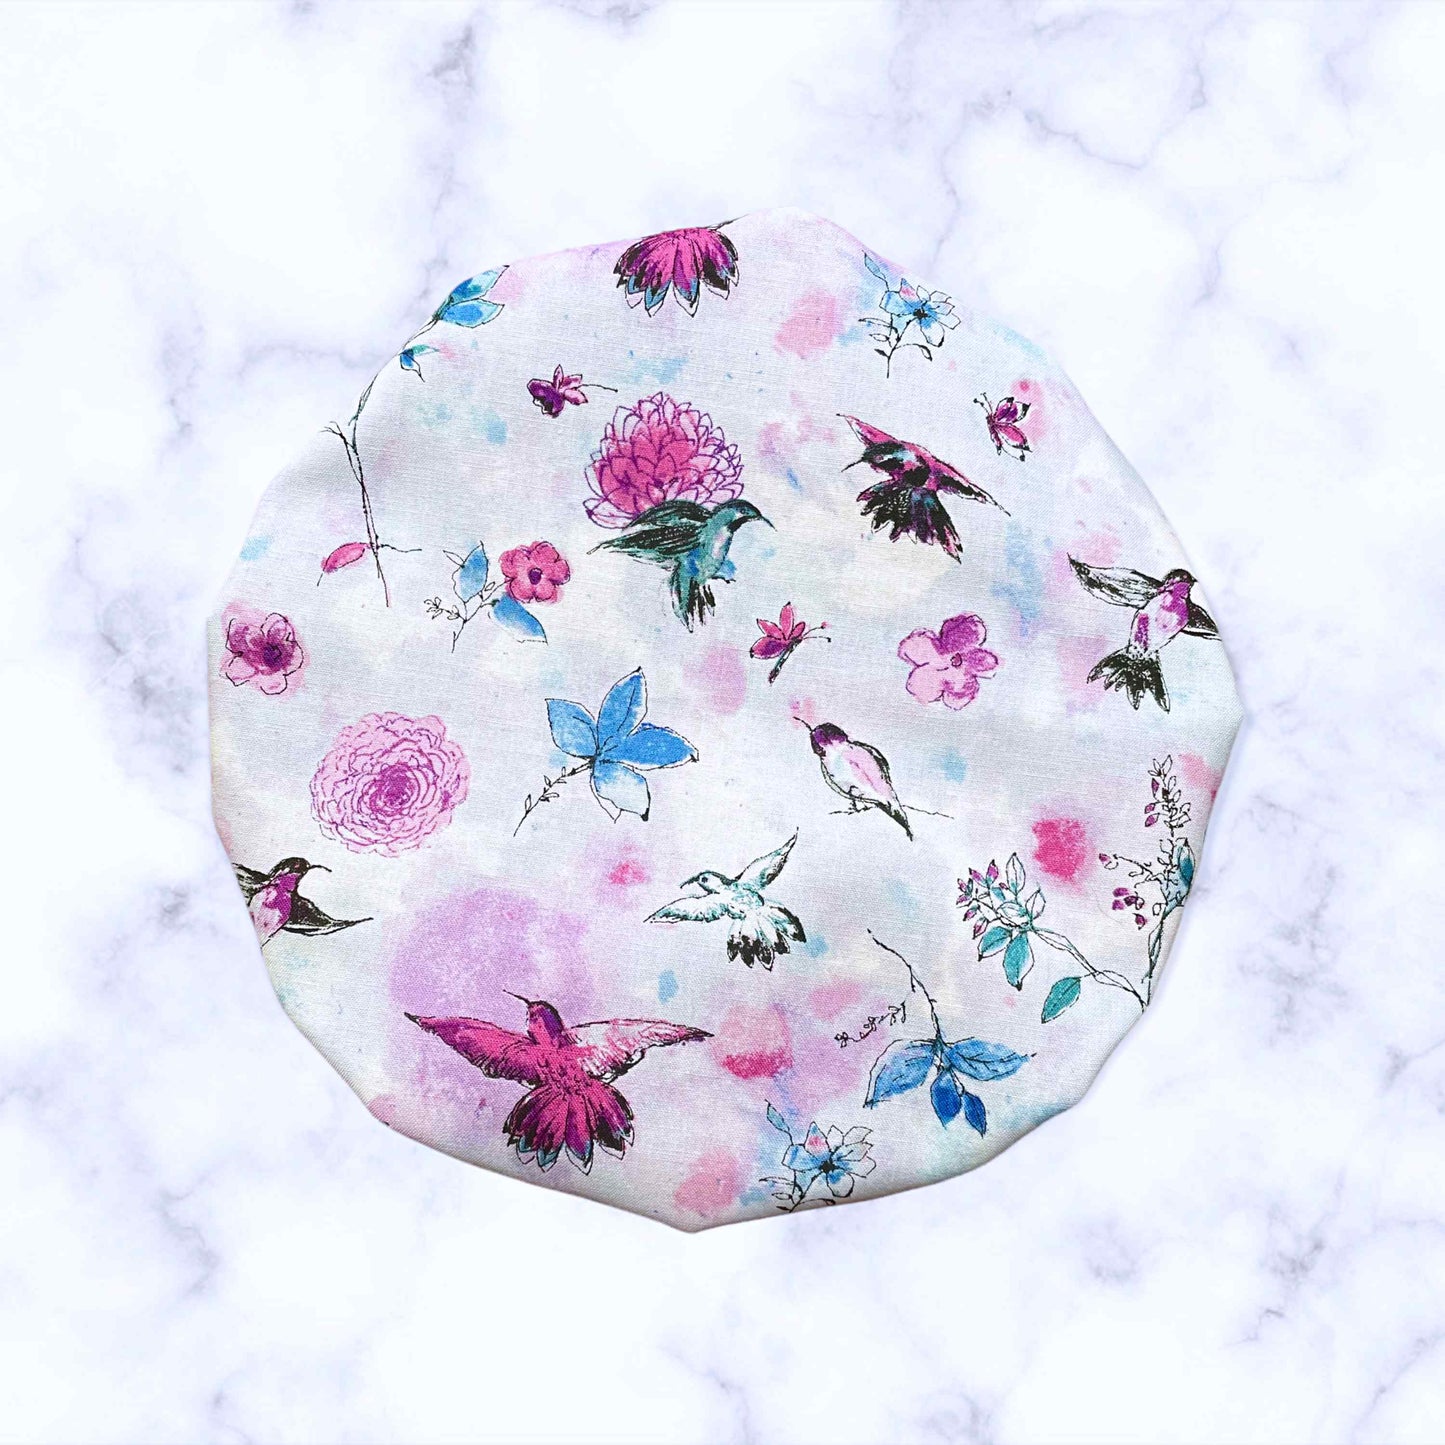 Stand Mixer Bowl Covers - Floral Hummingbirds